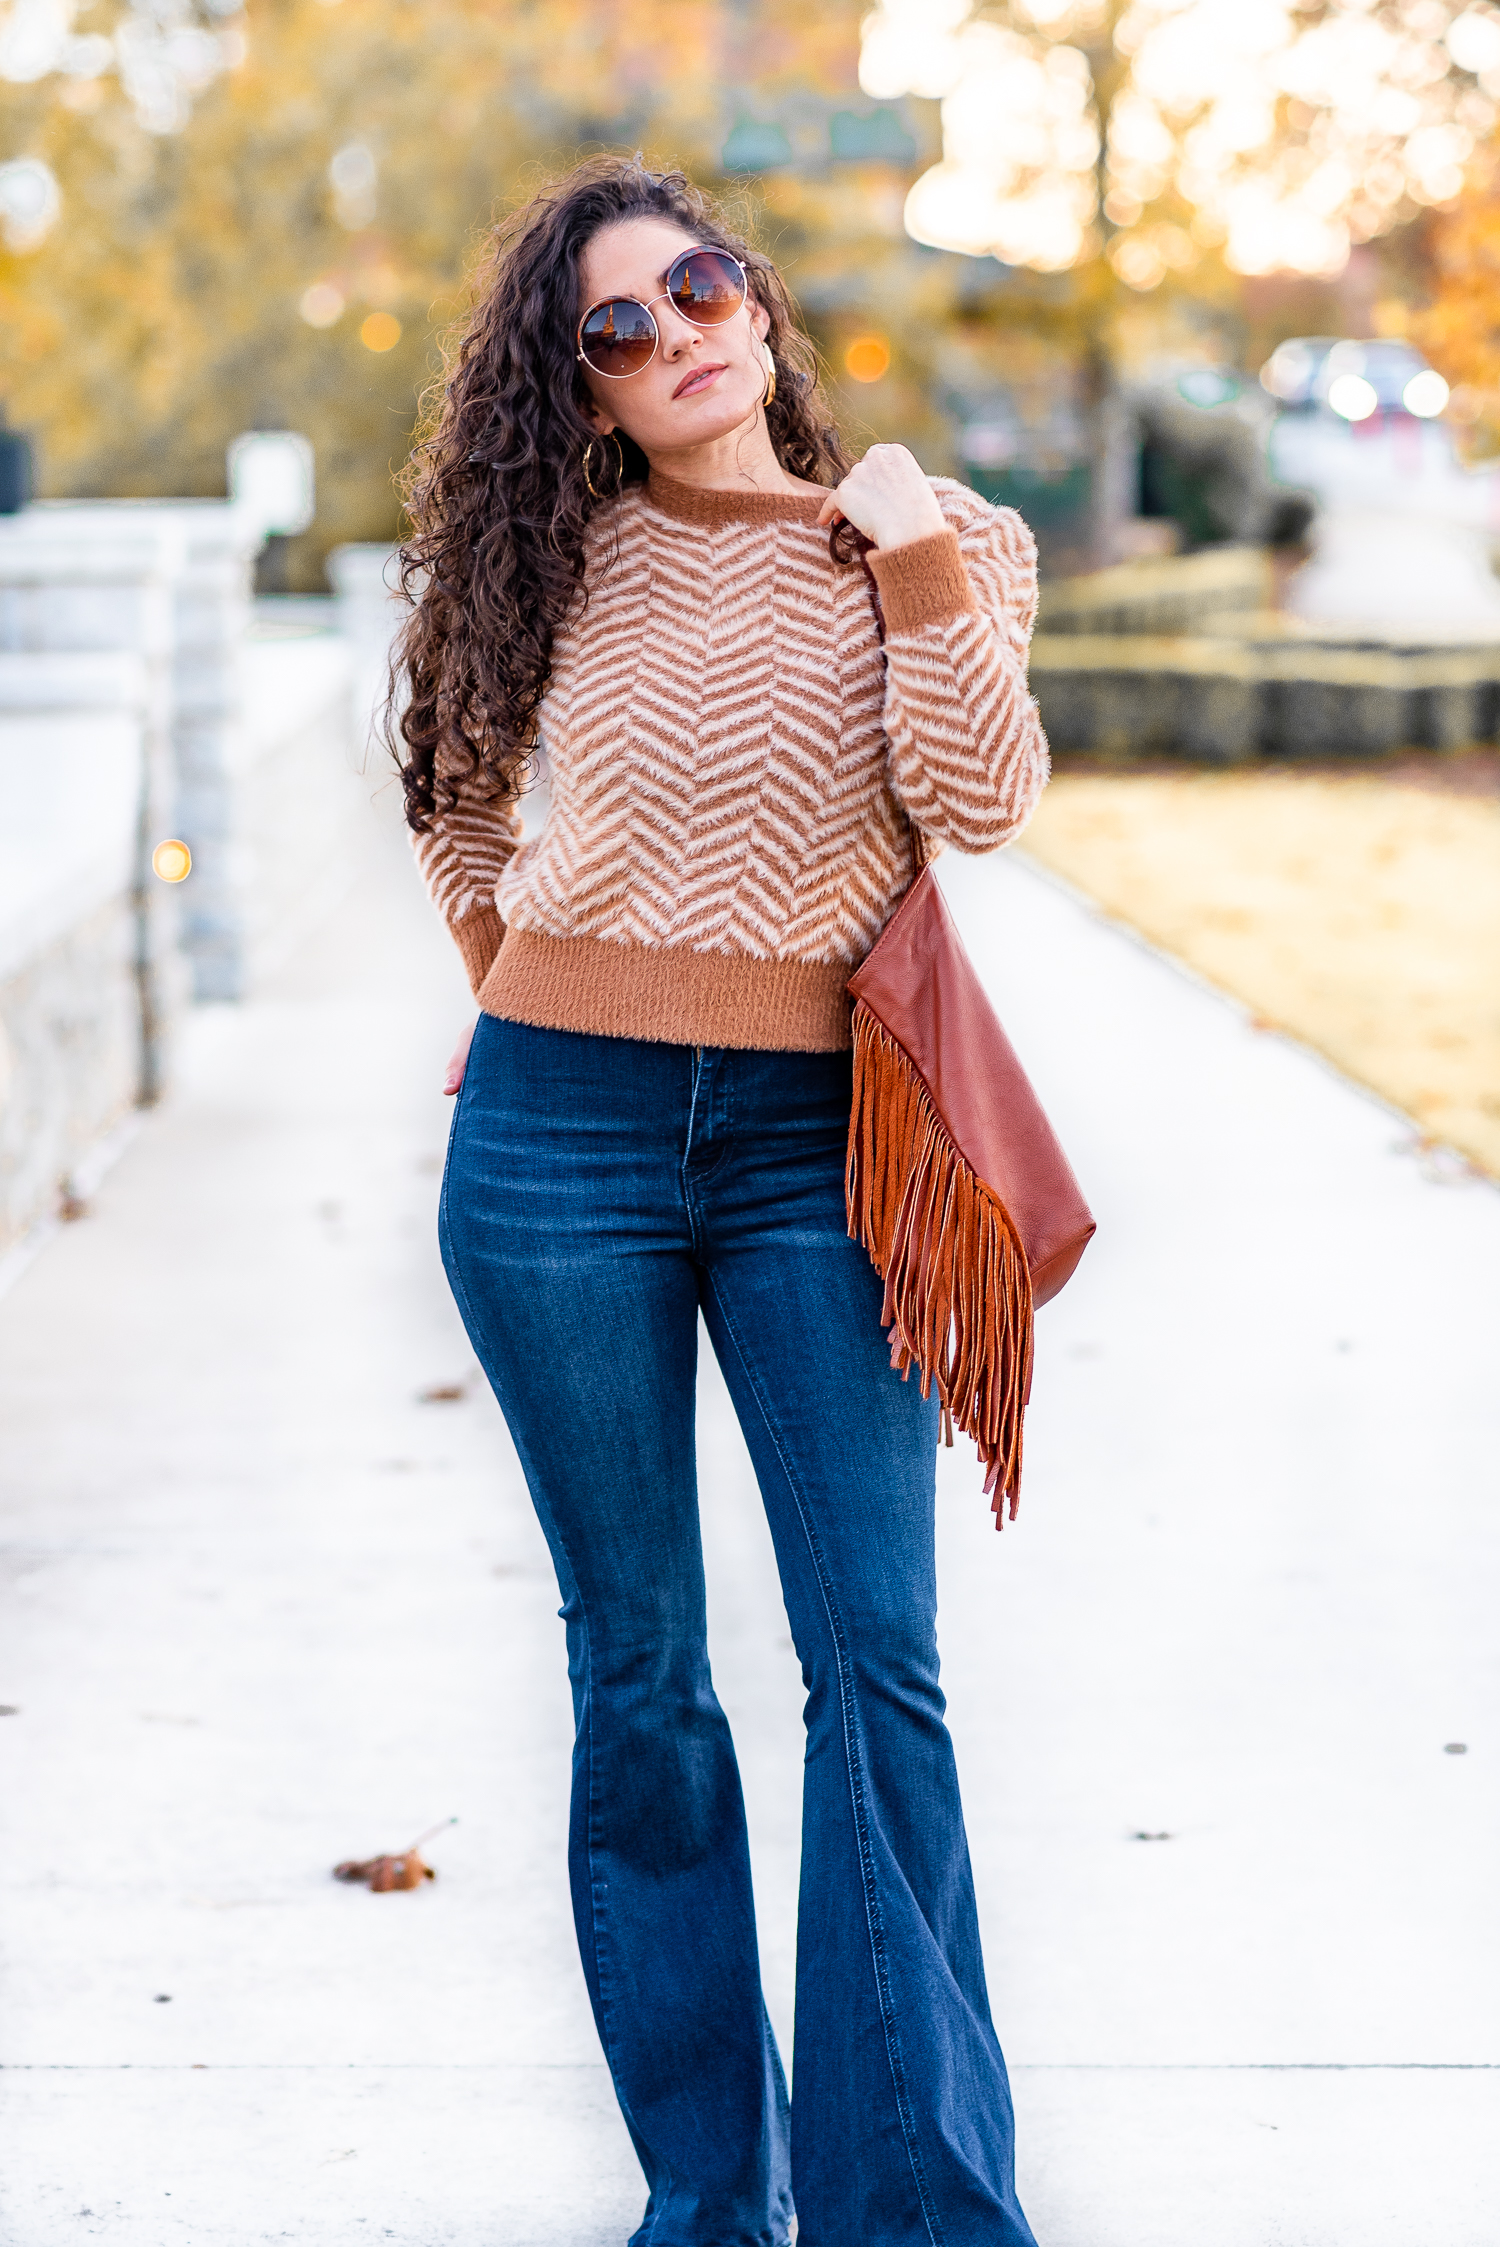 Black Bell Bottoms Outfit Ideas - Orange Hoodie with Black Bell Bottoms &  Boots Now, let's take a 180-degree turn and take a look at a more cheerful  and youthful look. To